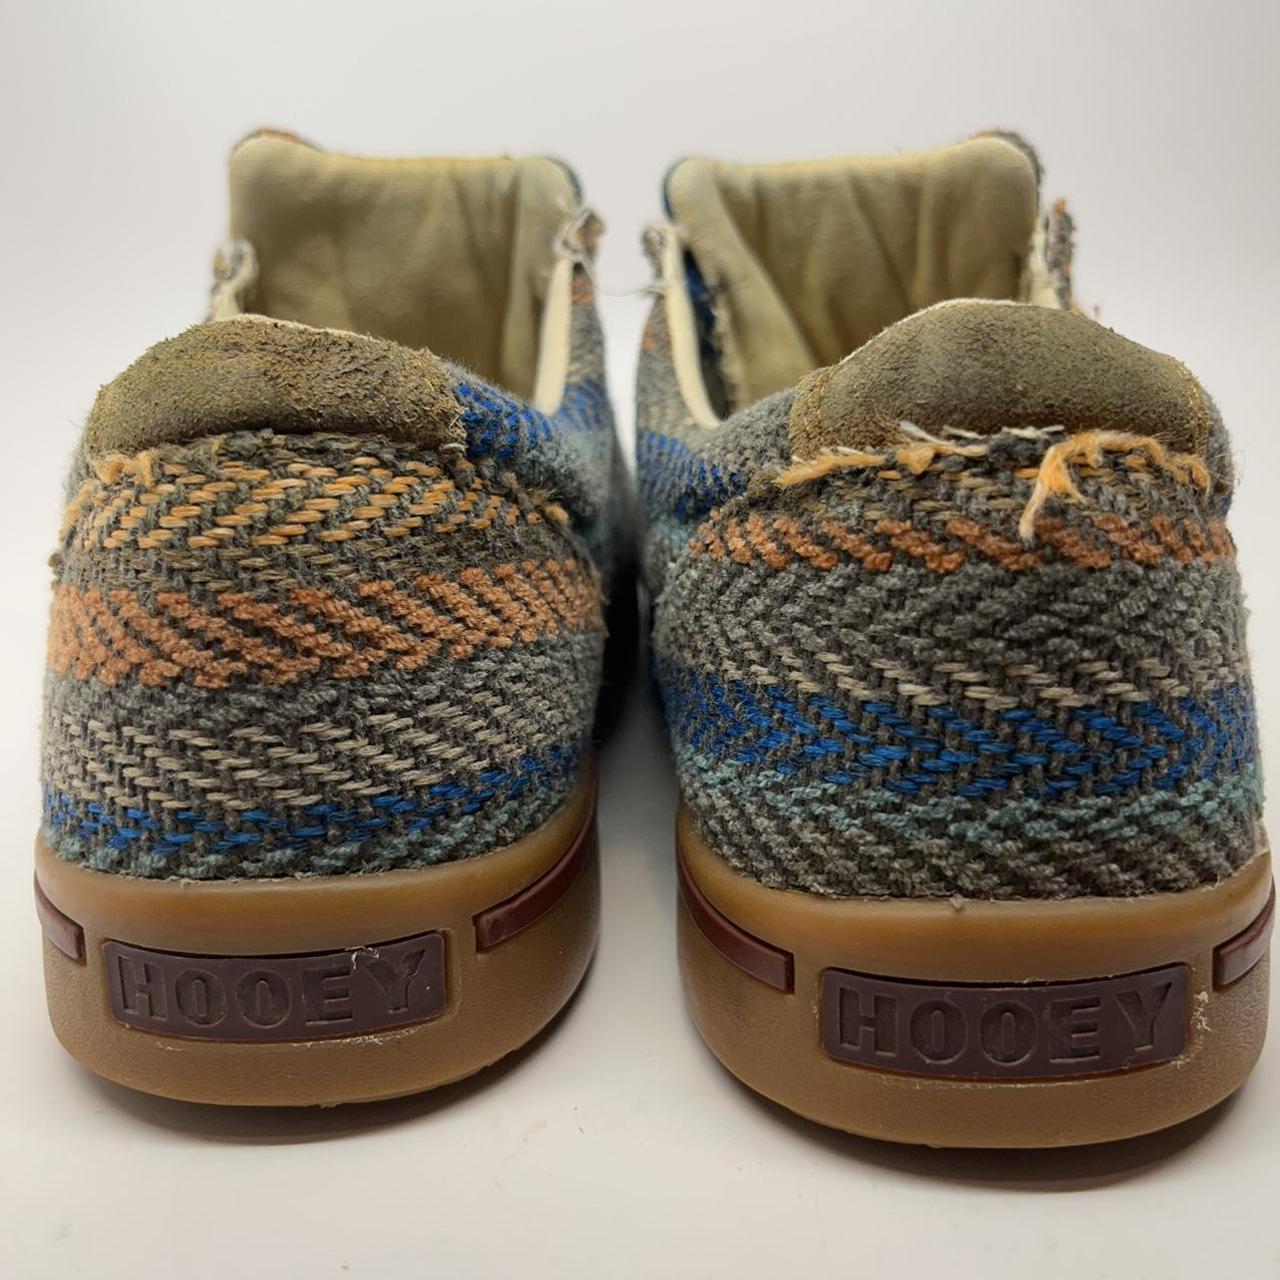 Hooey Men's Tan and Blue Trainers (5)